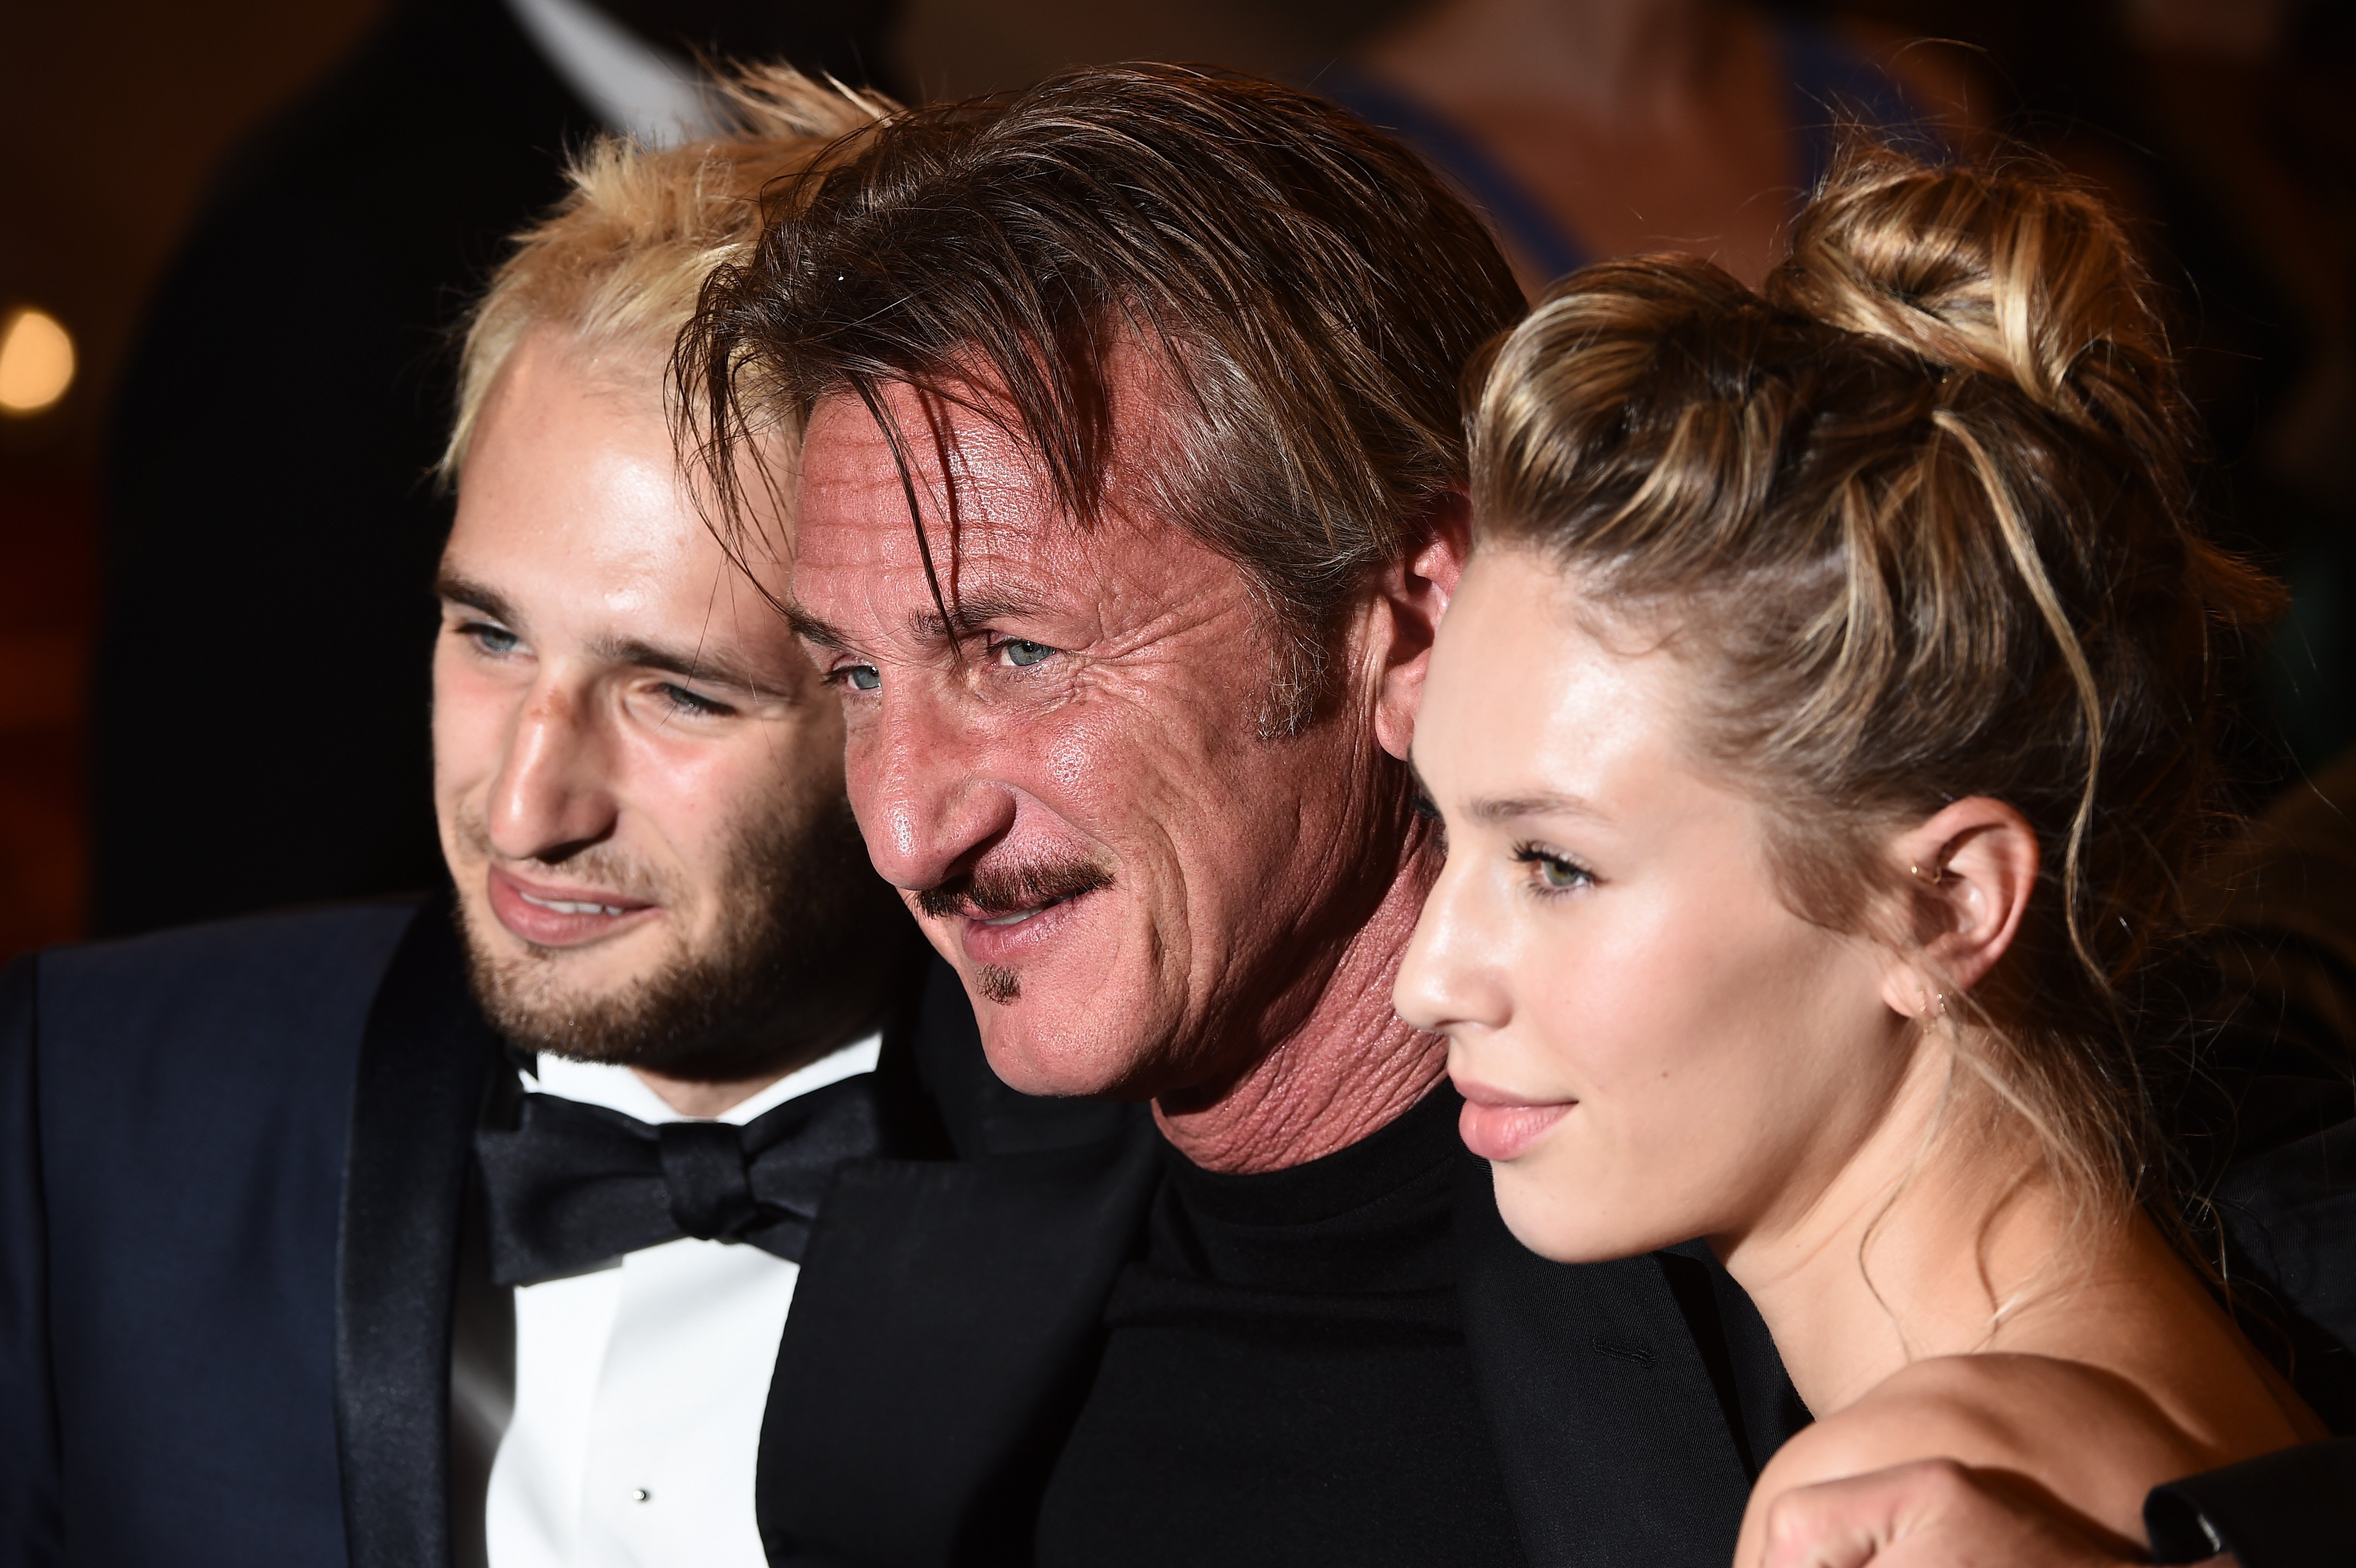 Sean Penn, his son Hopper Penn and daughter Dylan Penn leave "The Last Face" Premiere during the 69th annual Cannes Film Festival at the Palais des Festivals on May 20, 2016, in Cannes, France. | Source: Getty Images